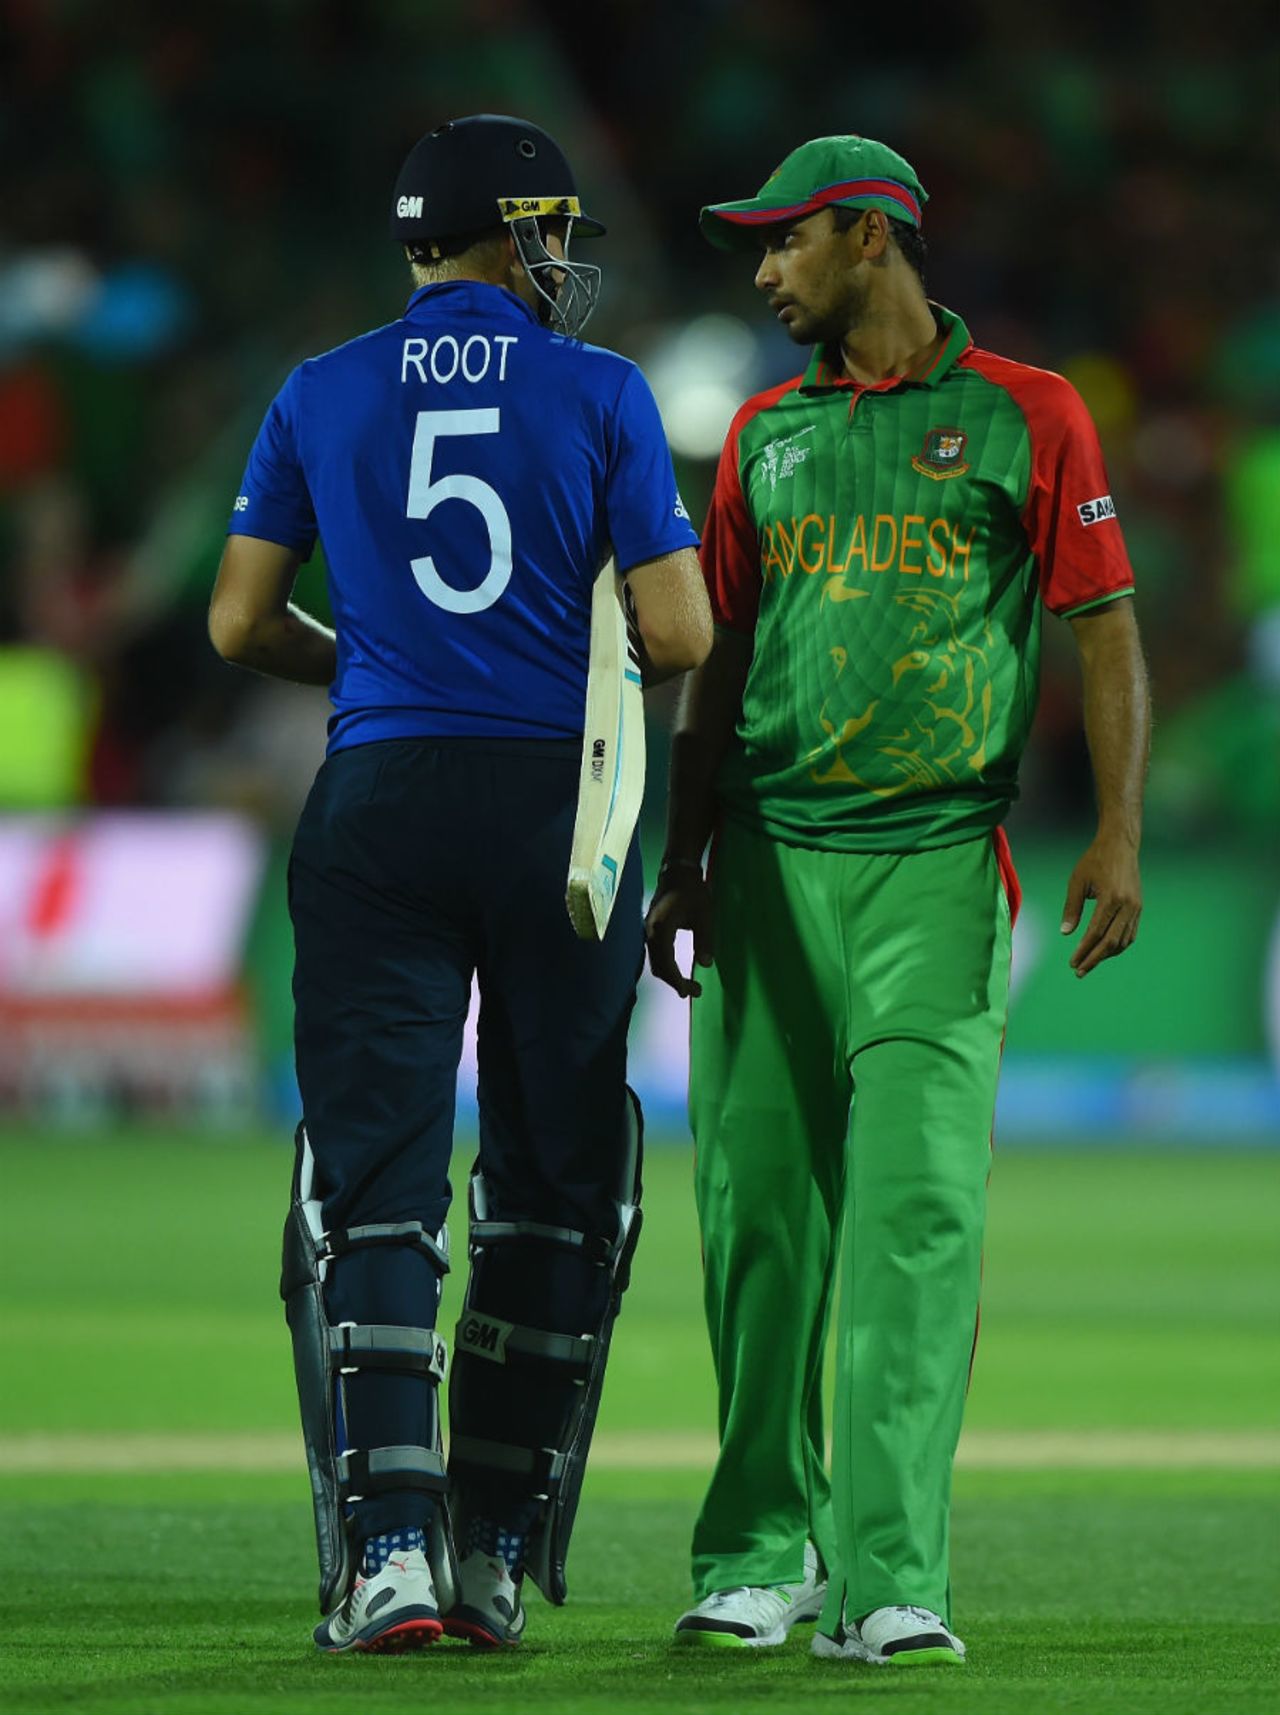 Mashrafe Mortaza and Joe Root exchange a few words after Ian Bell's dismissal, England v Bangladesh, World Cup 2015, Group A, Adelaide, March 9, 2015